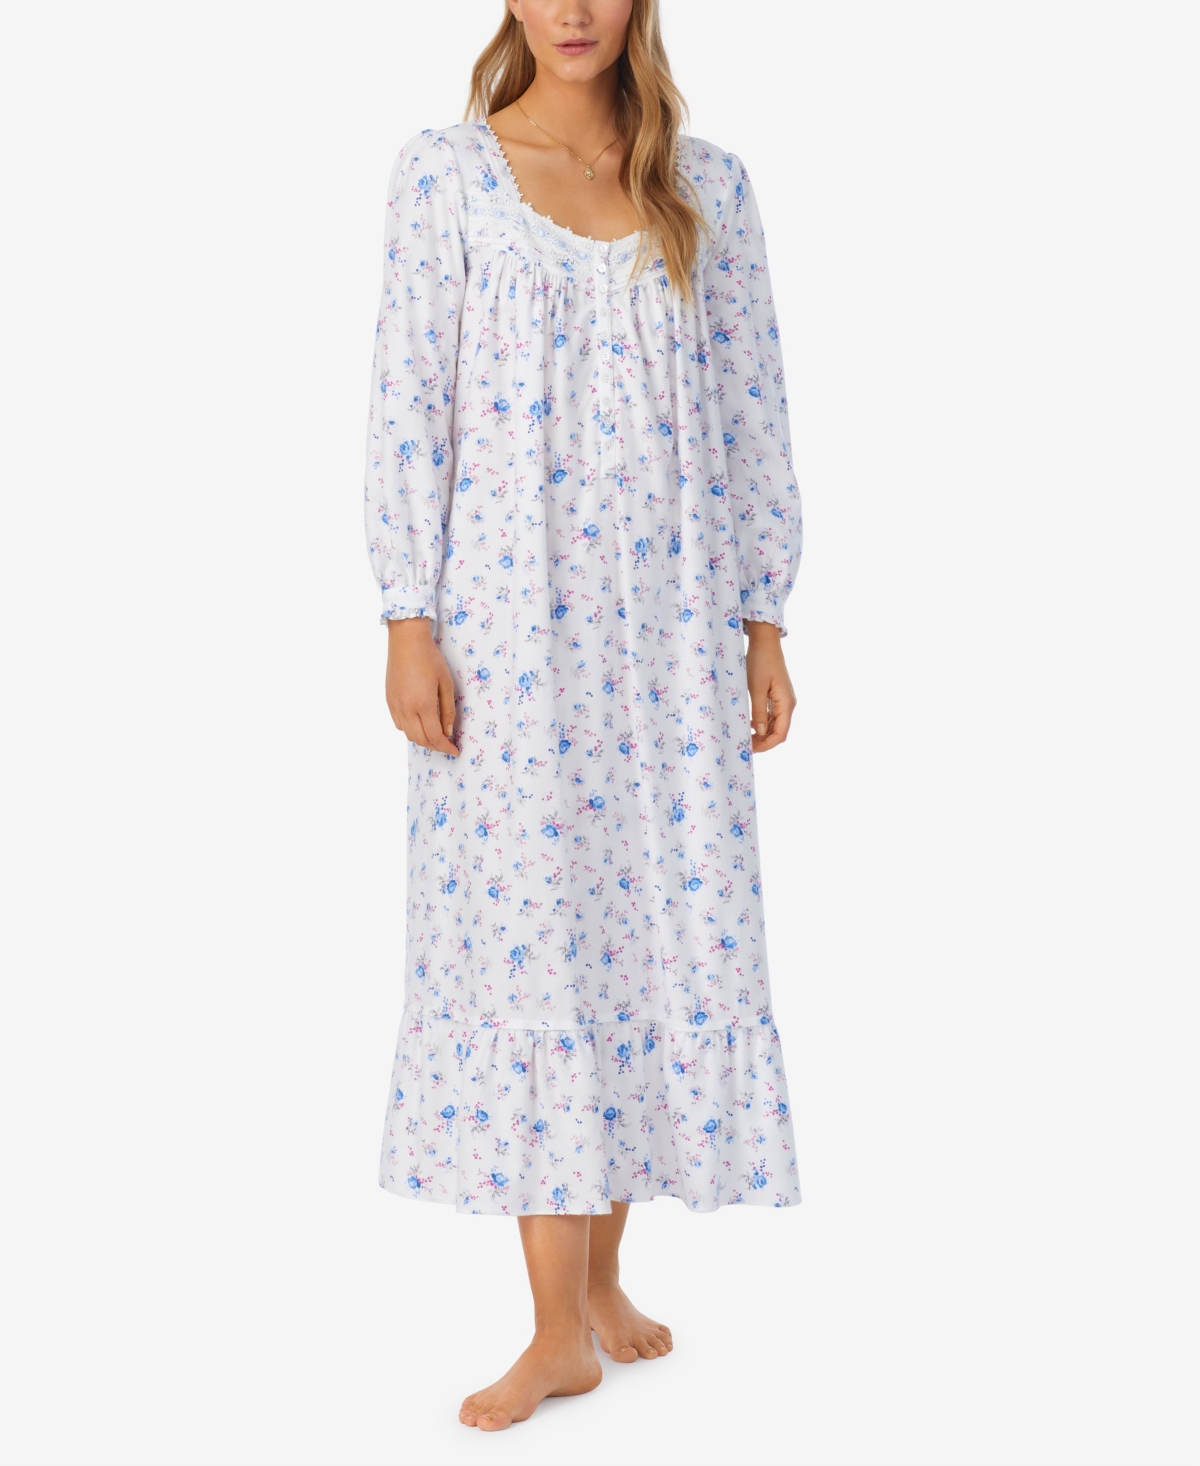 EILEEN WEST WOMEN'S EMBELLISHED FLORAL FLANNEL NIGHTGOWN